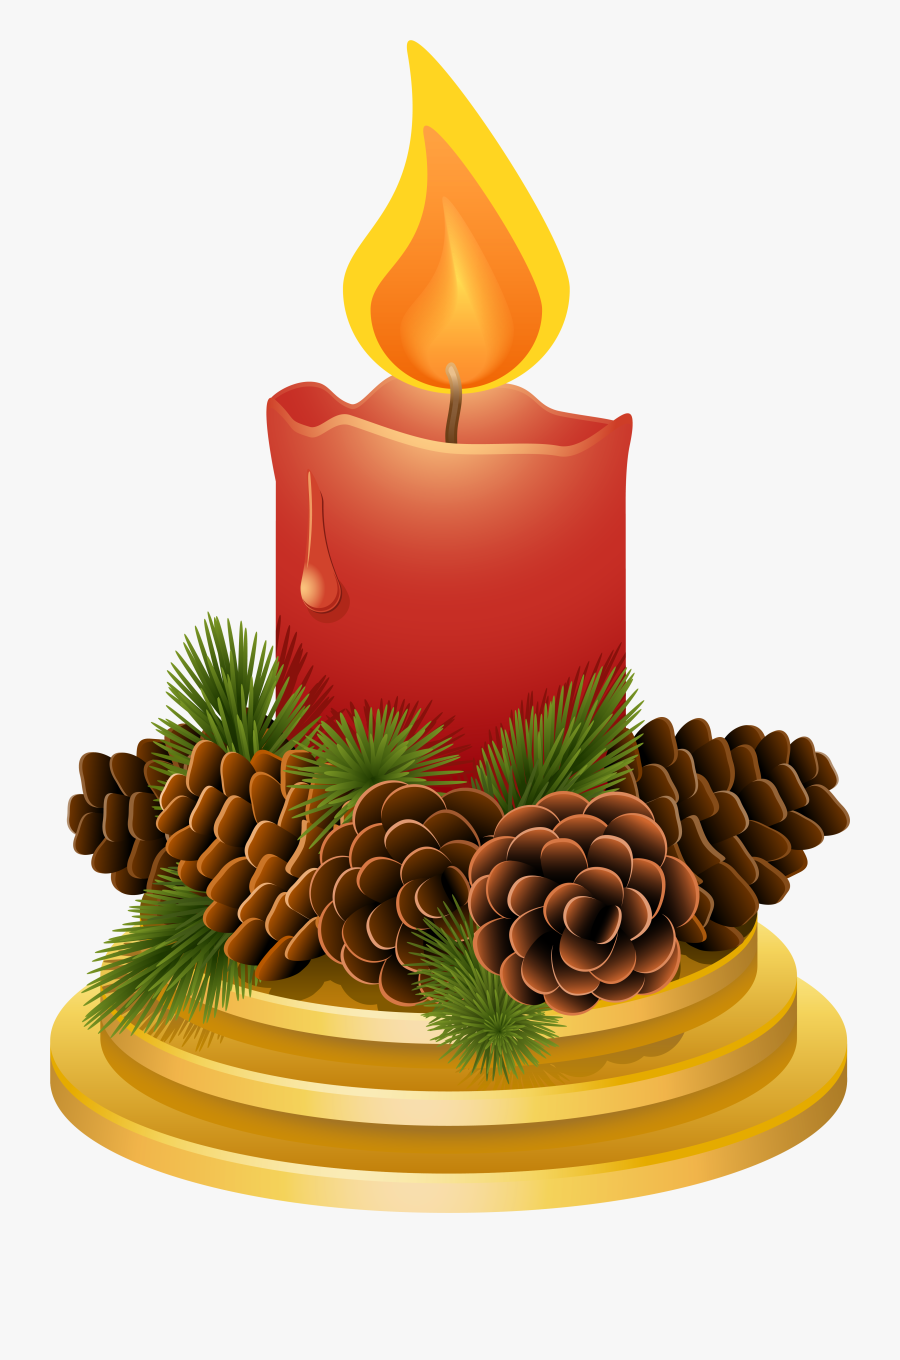 Clipart Candle Colorful Candle - Candle Png Christmas, Transparent Clipart